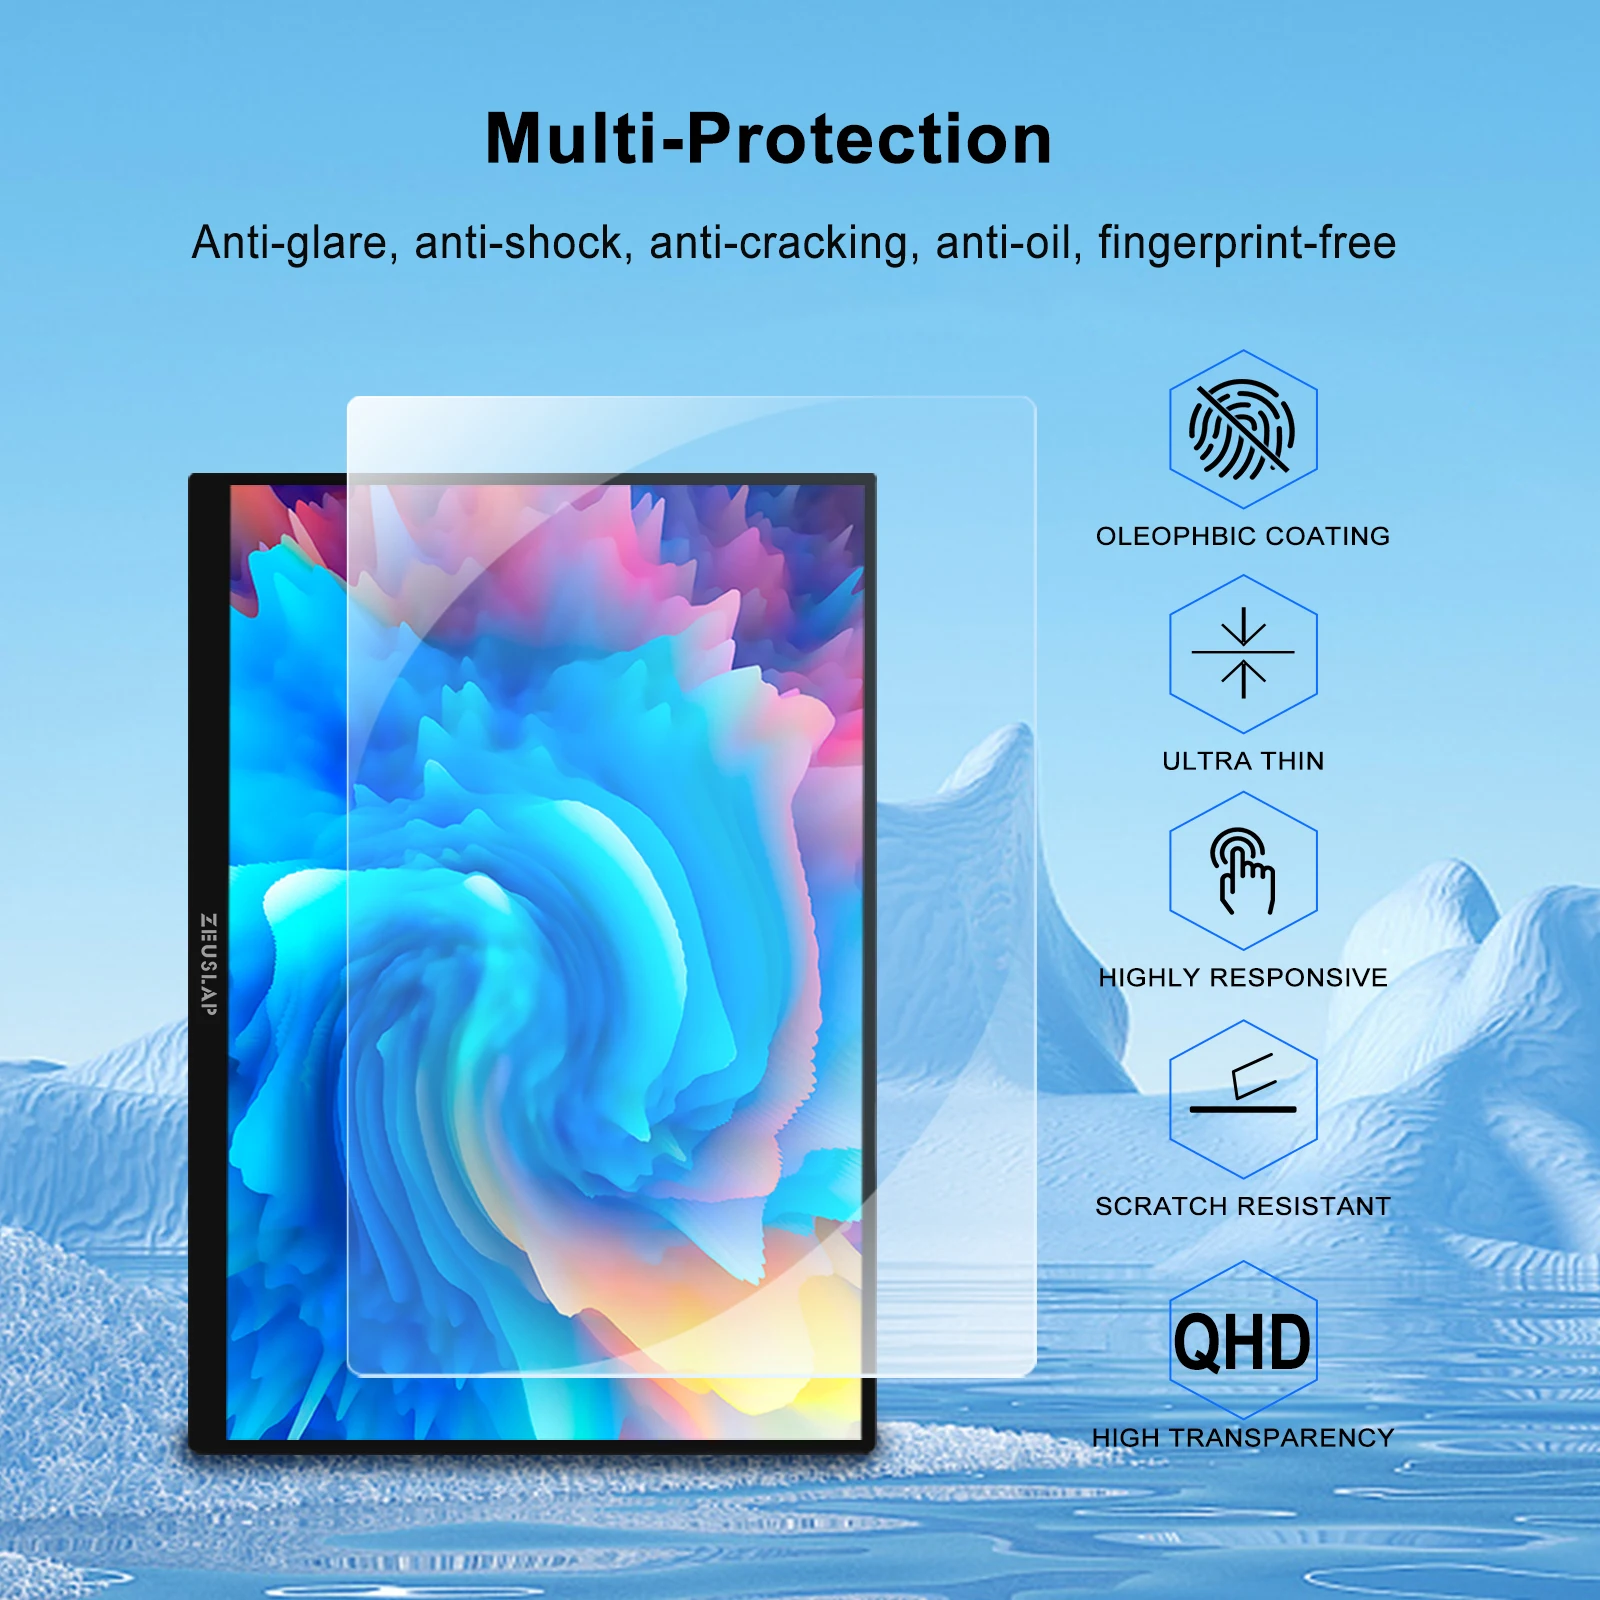 ZEUSLAP 16inch tempered glass screen protector for ZEUSLAP-Z16 Max pro, Z16TV, P16KT full glass covered protection screen film